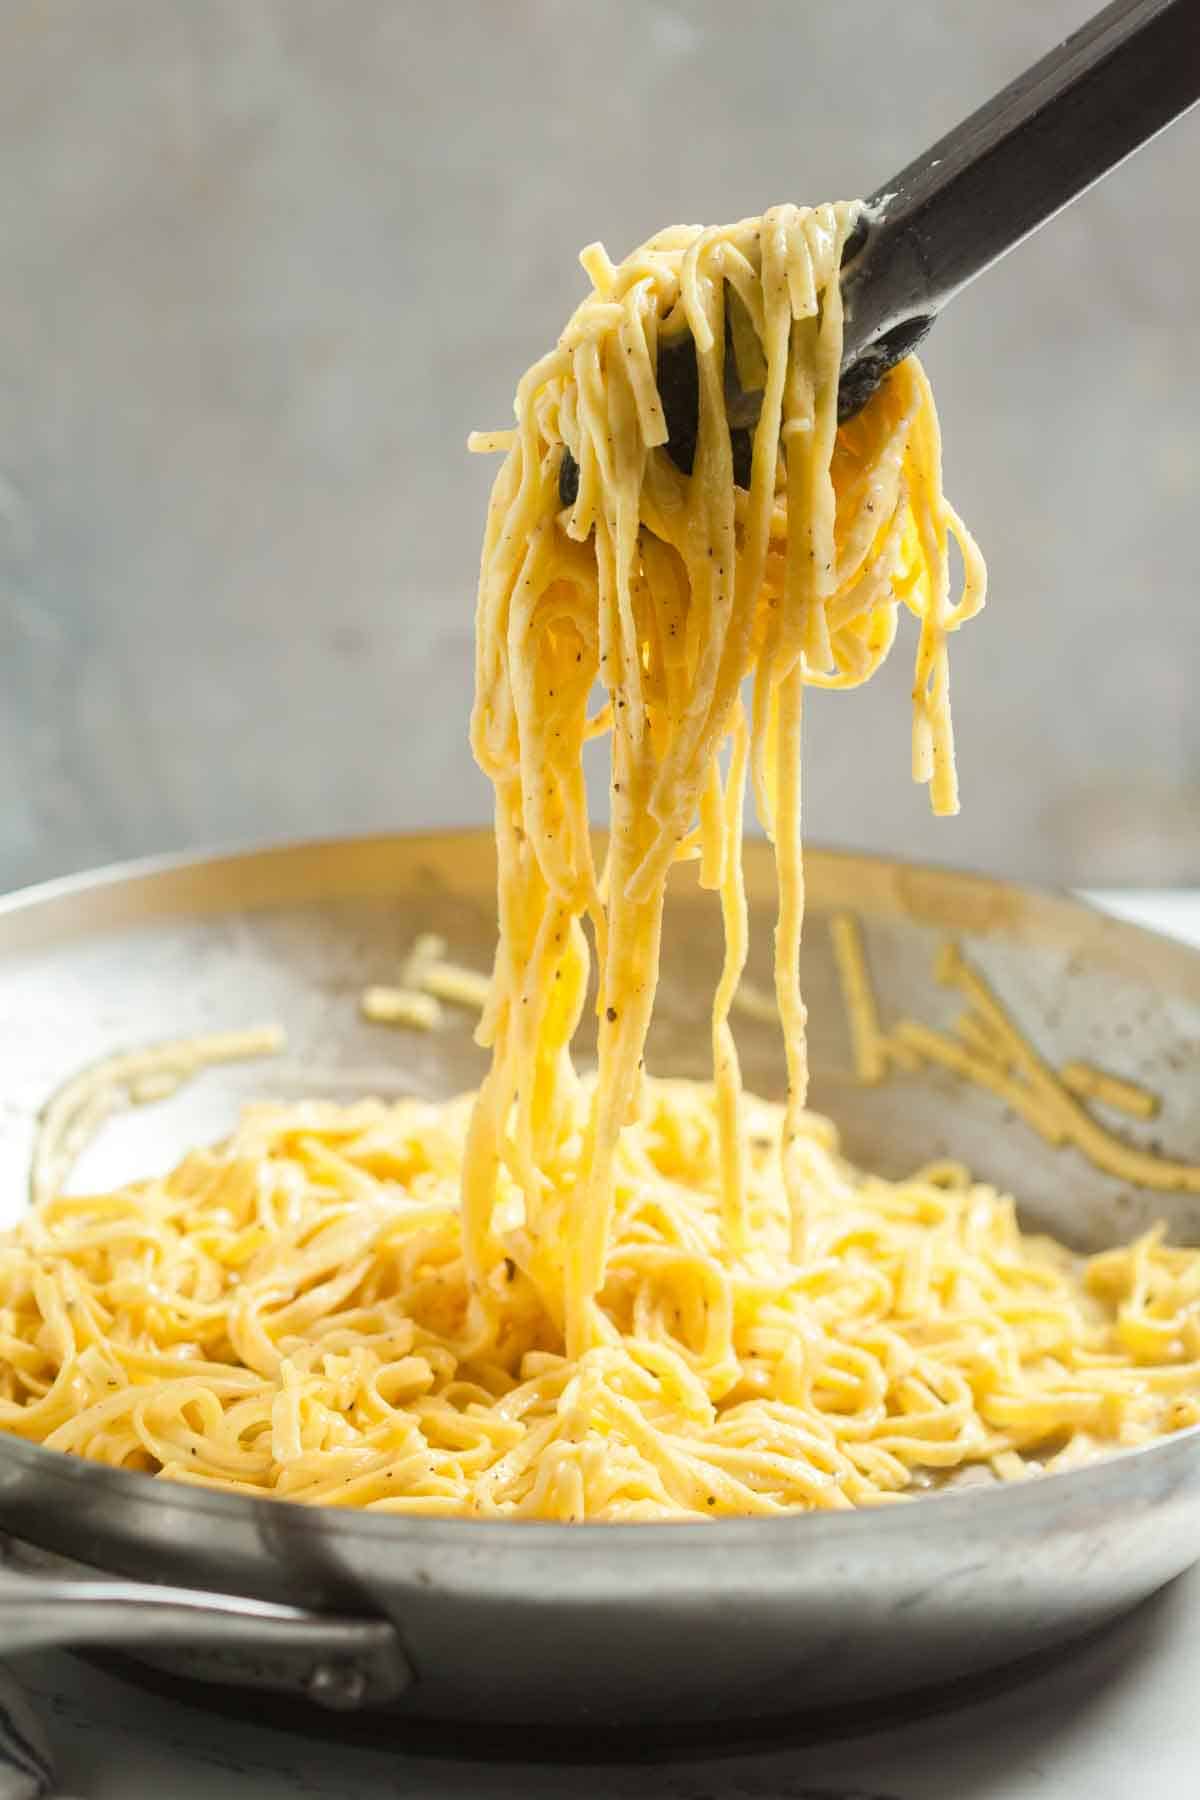 Tons lifting this easy cacio e pepe recipe from the pot.